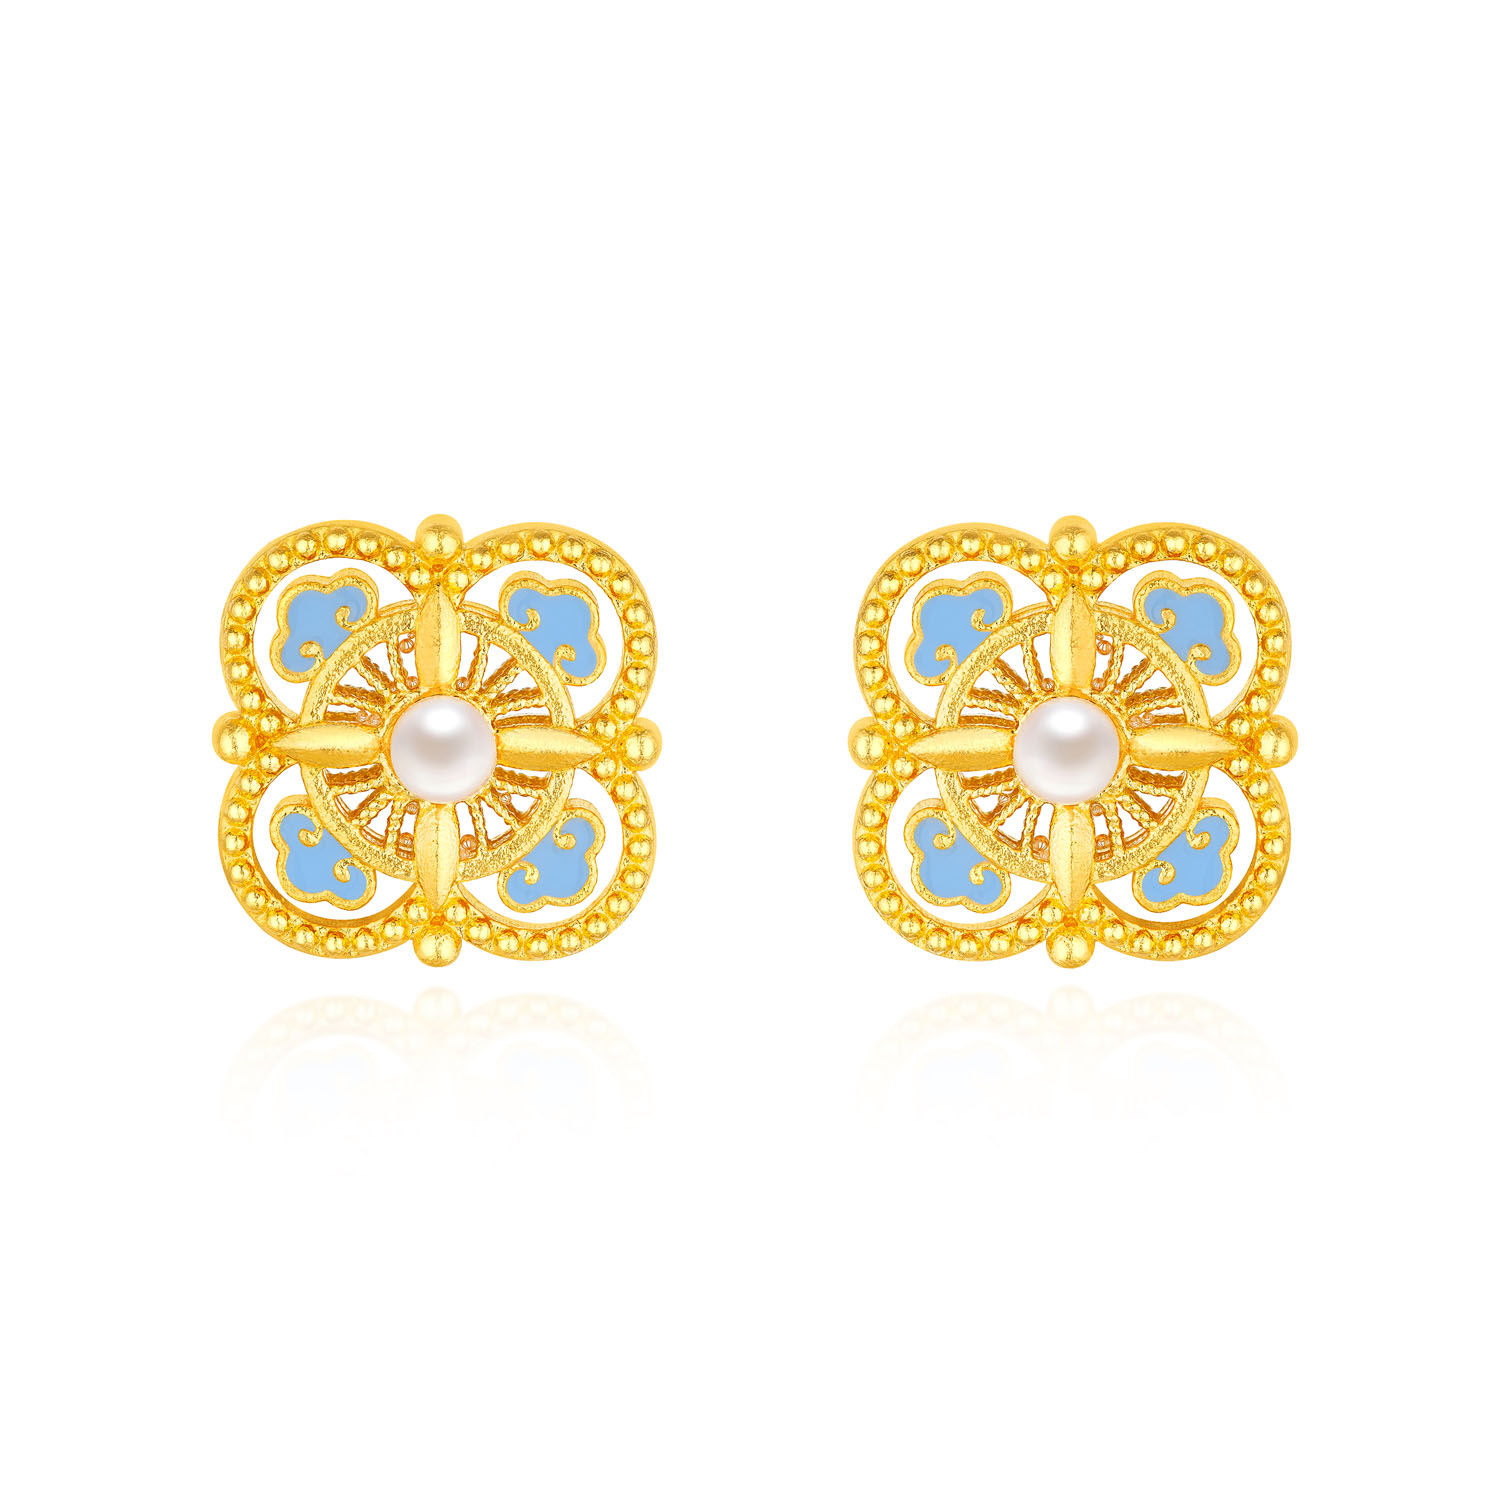 Heirloom Fortune - Charm of Song Dynasty Collection "Auspicious Song Style" Gold Pearl Earrings